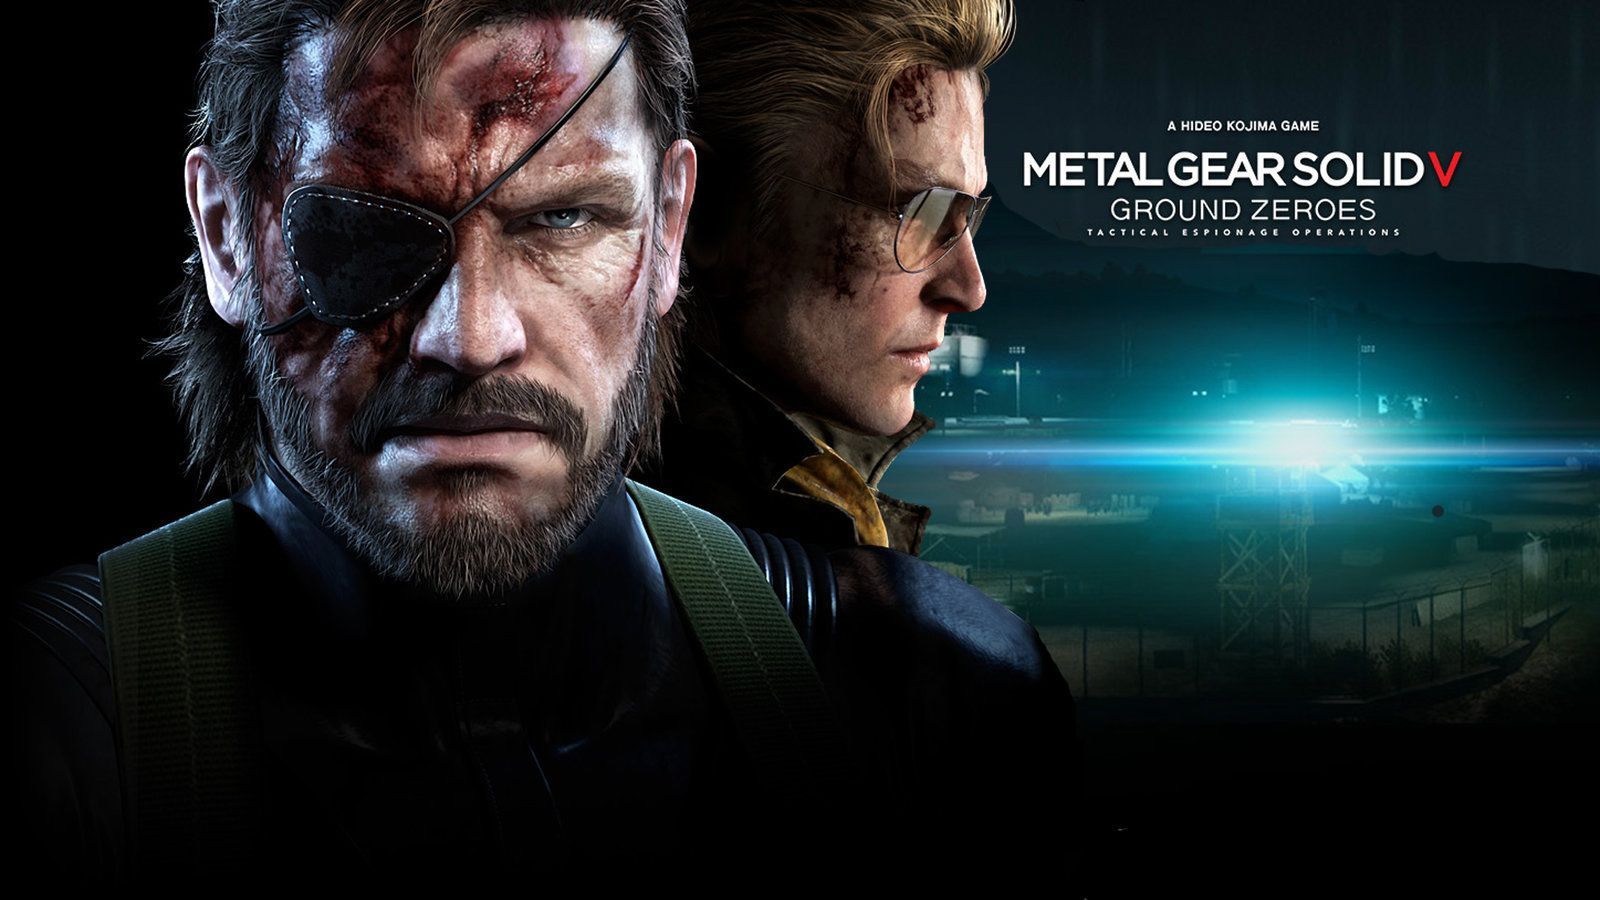 MGS V: Ground Zeroes Cover Games Wallpaper HD Wallpaper. Metal gear solid, Metal gear, Metal